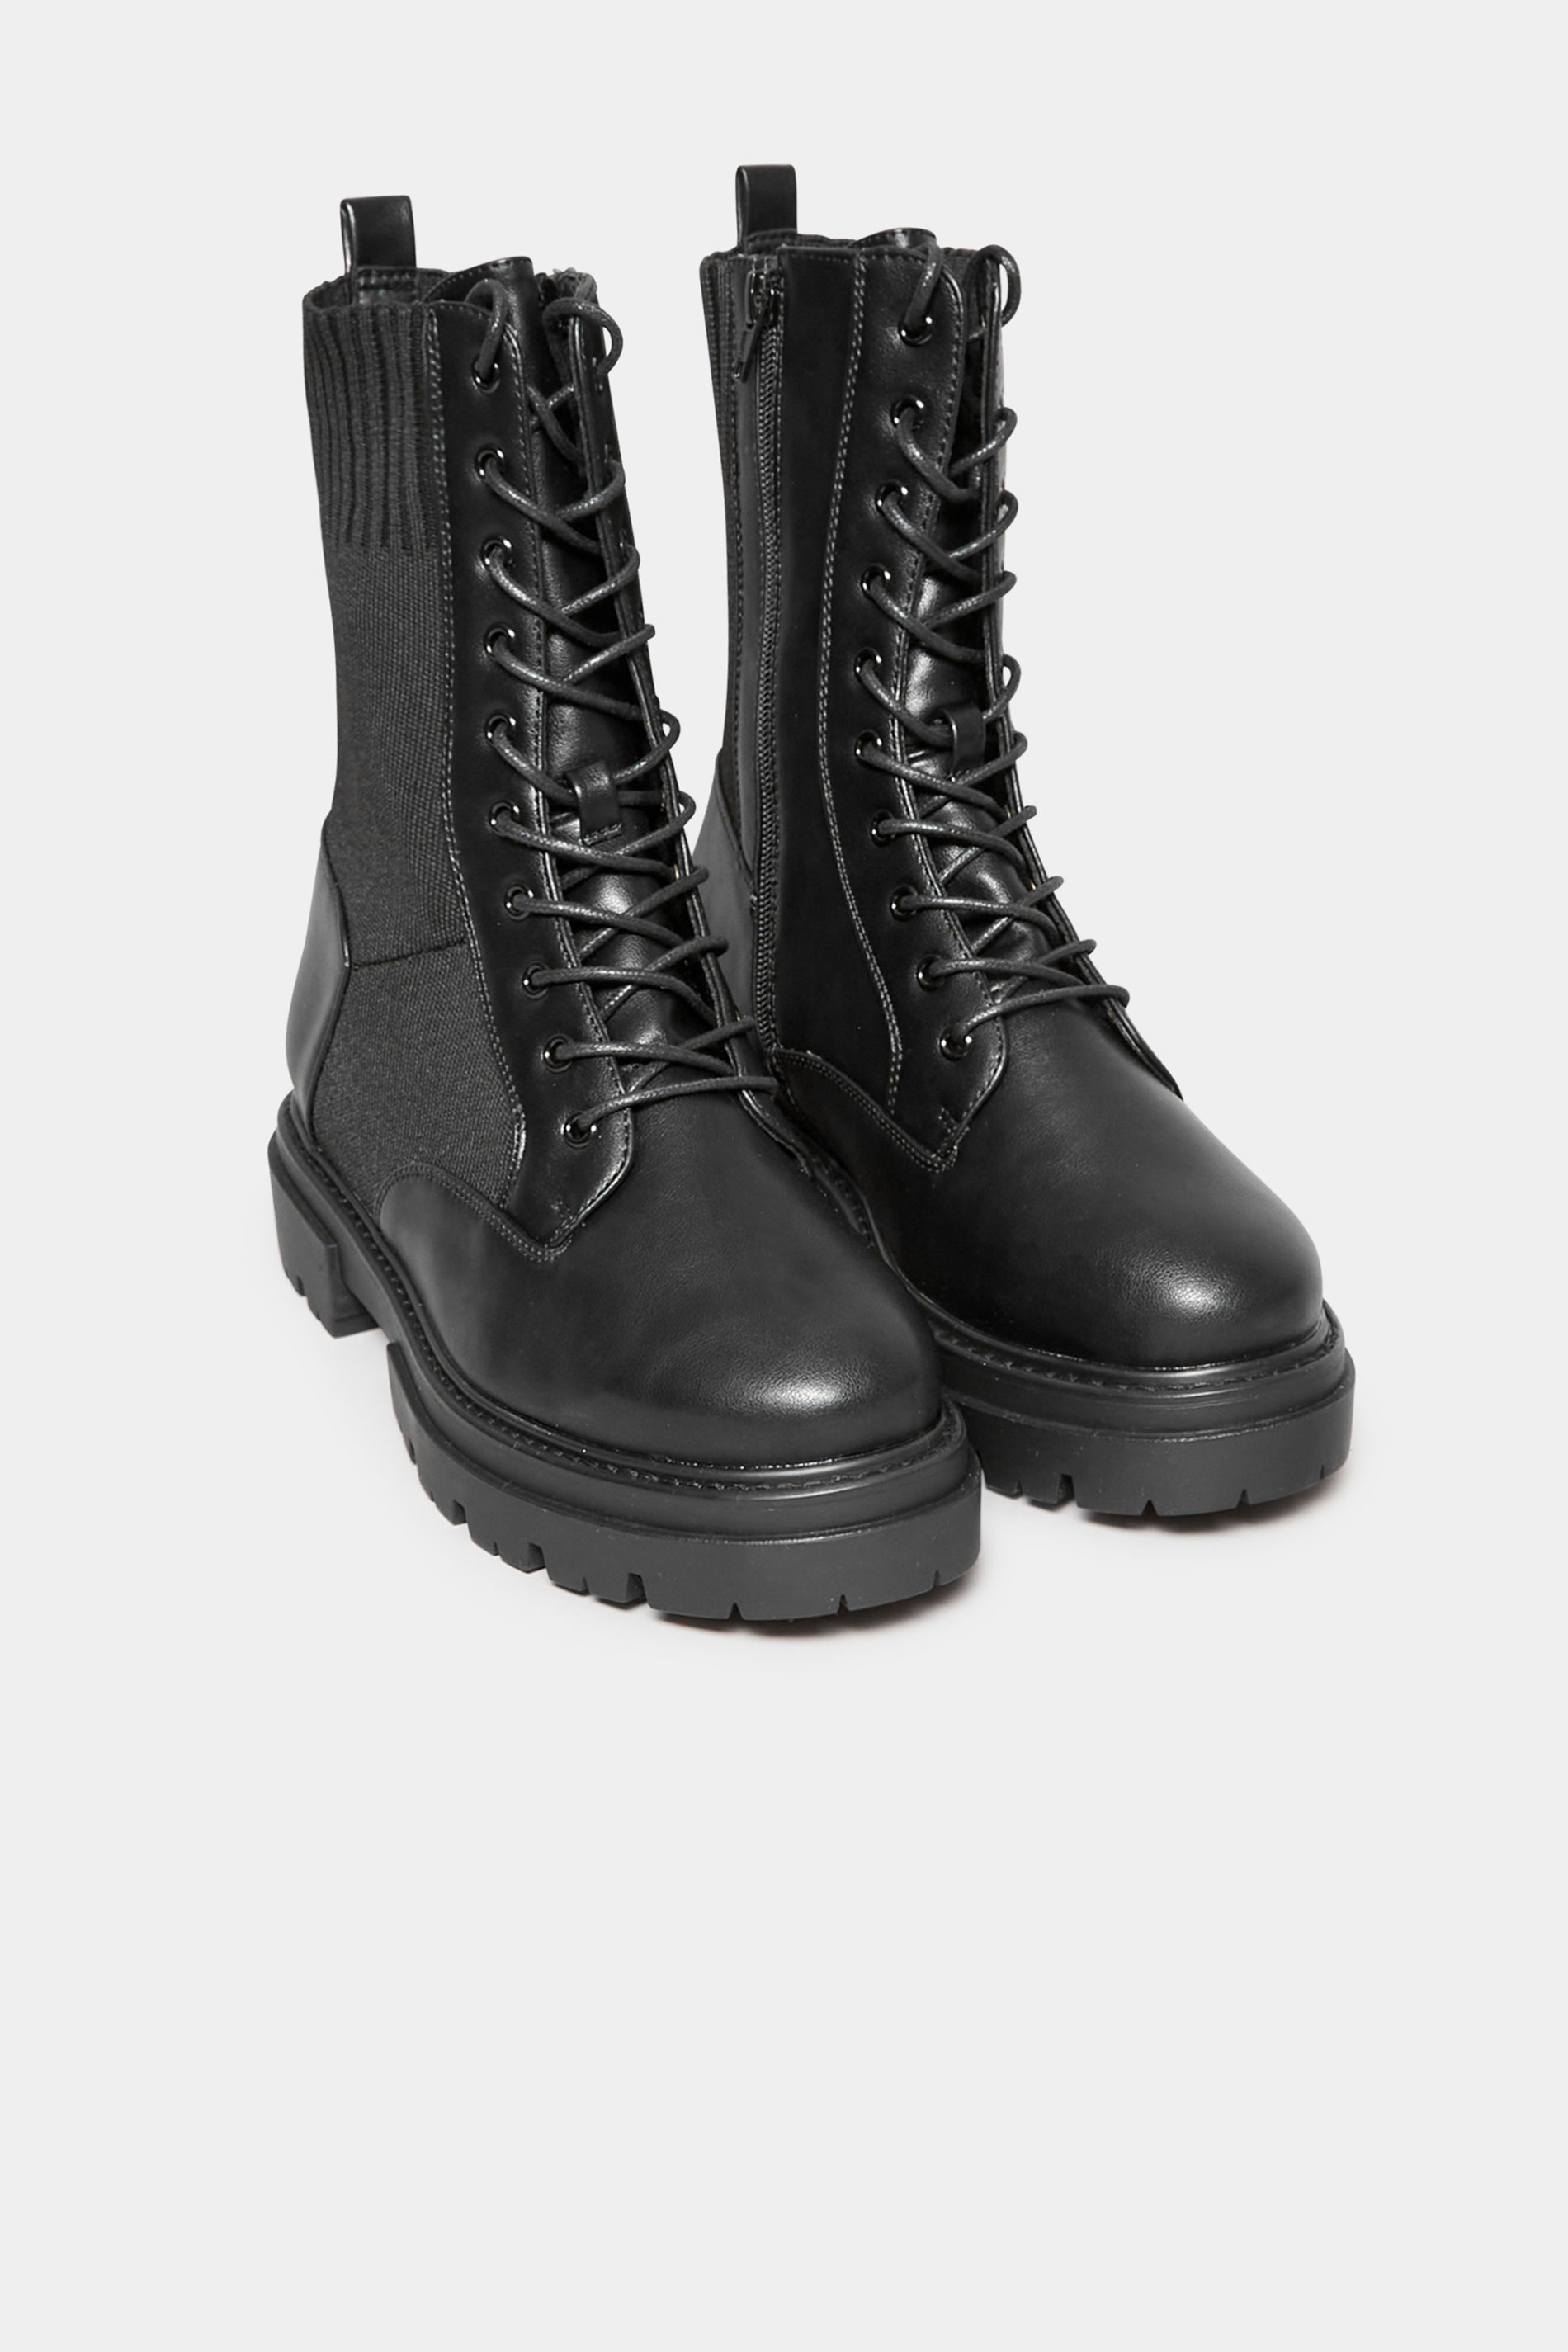 LIMITED COLLECTION Black Sock Lace Up Boots In Wide E Fit & Extra Wide ...